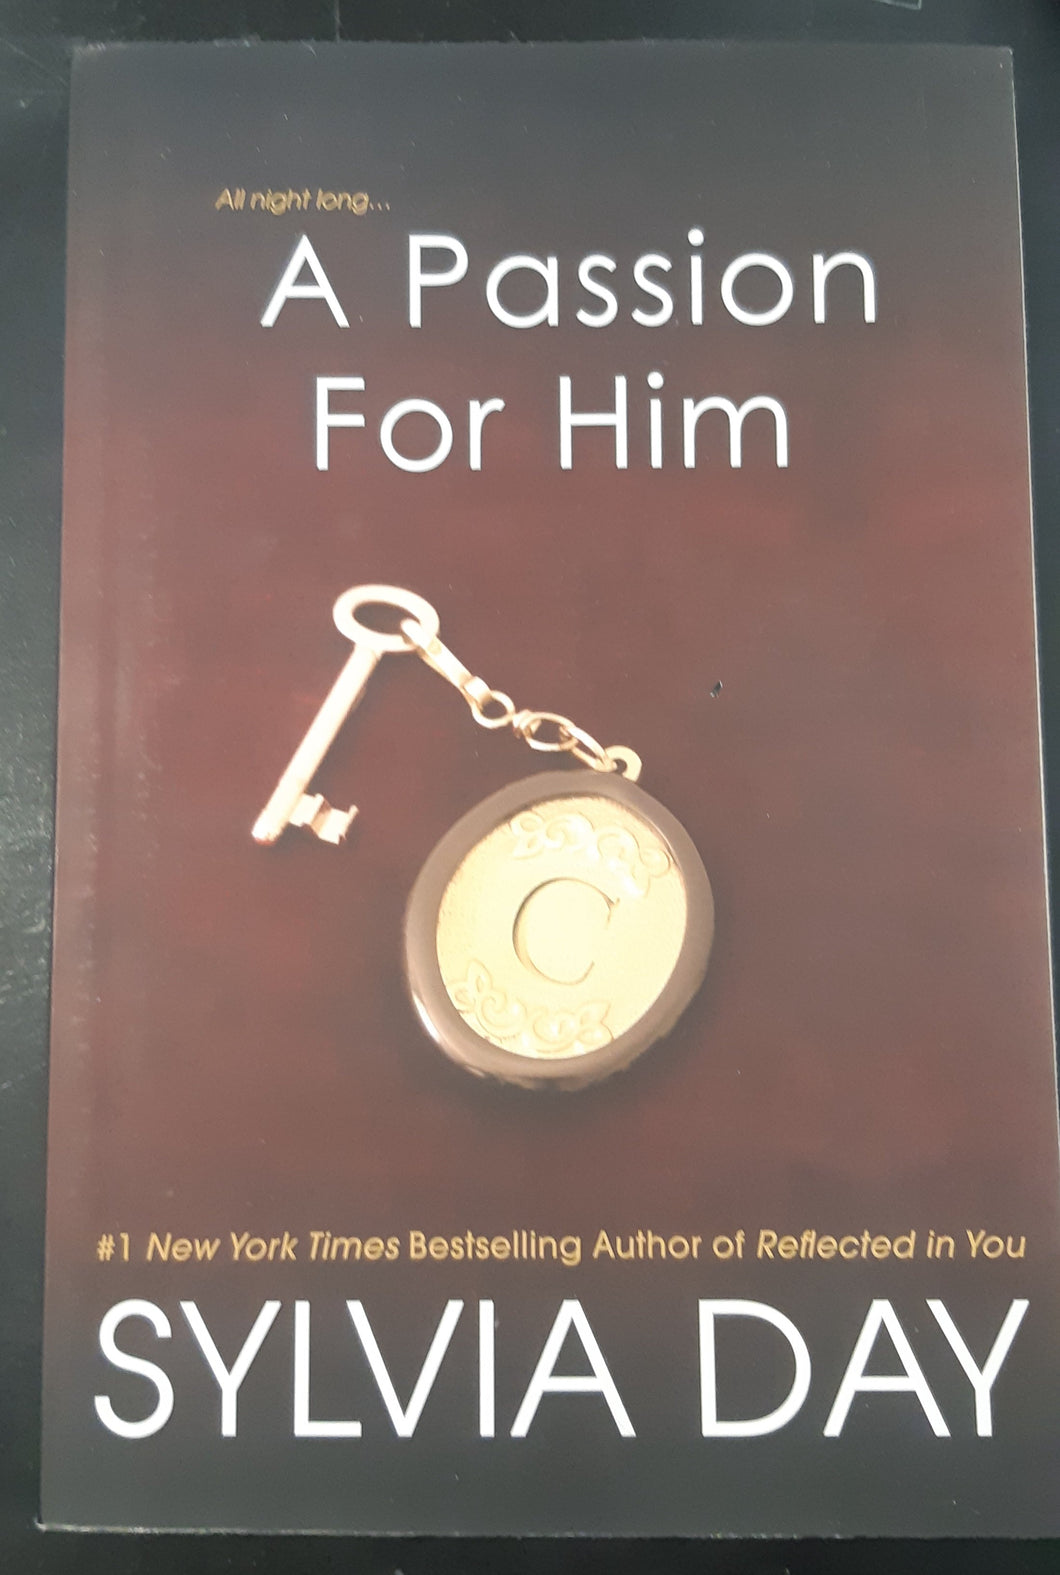 A Passion For Him by Sylvia Day